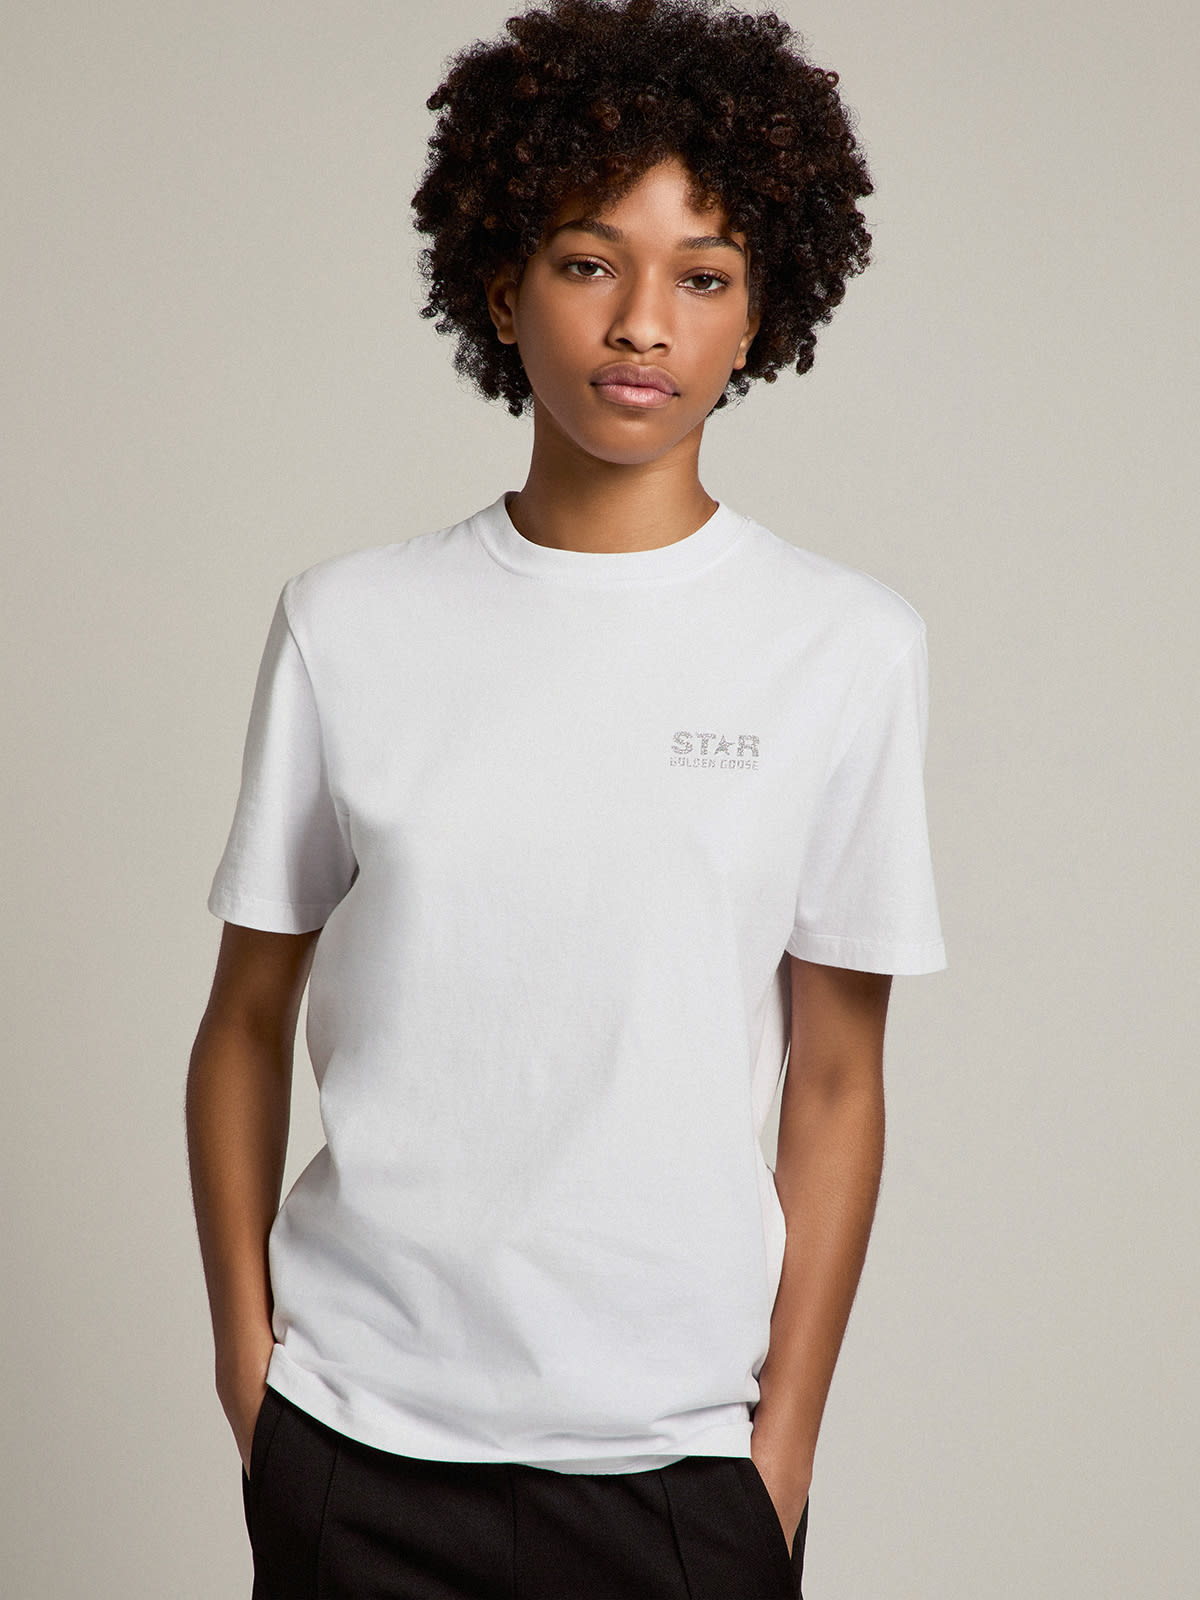 Women's white T-shirt with silver glitter logo and star